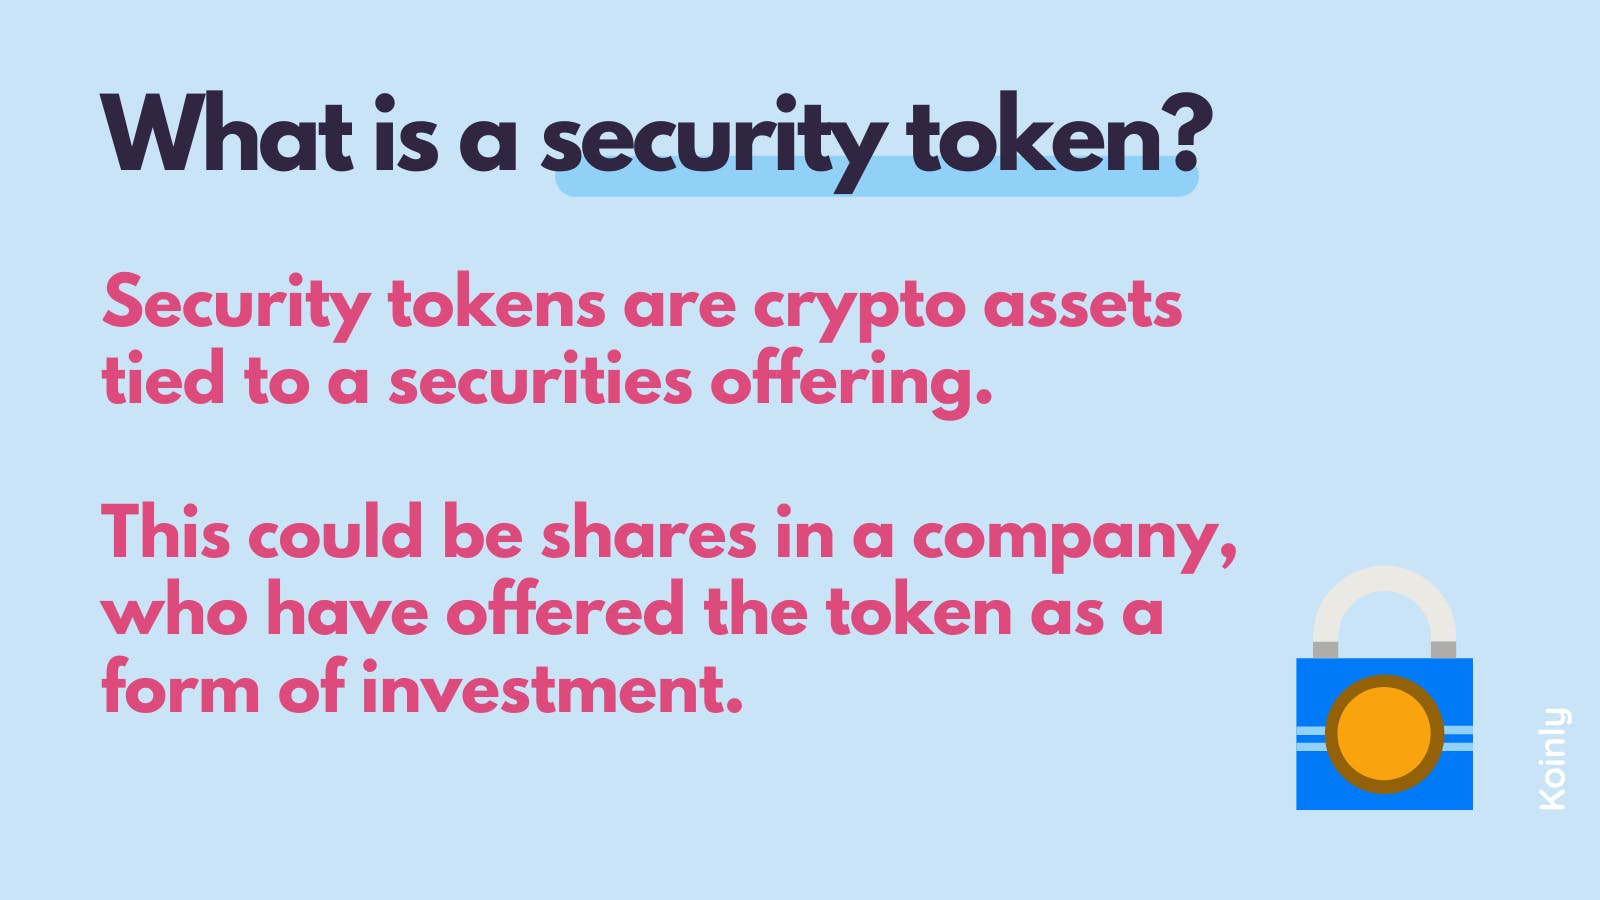 What is a security token?